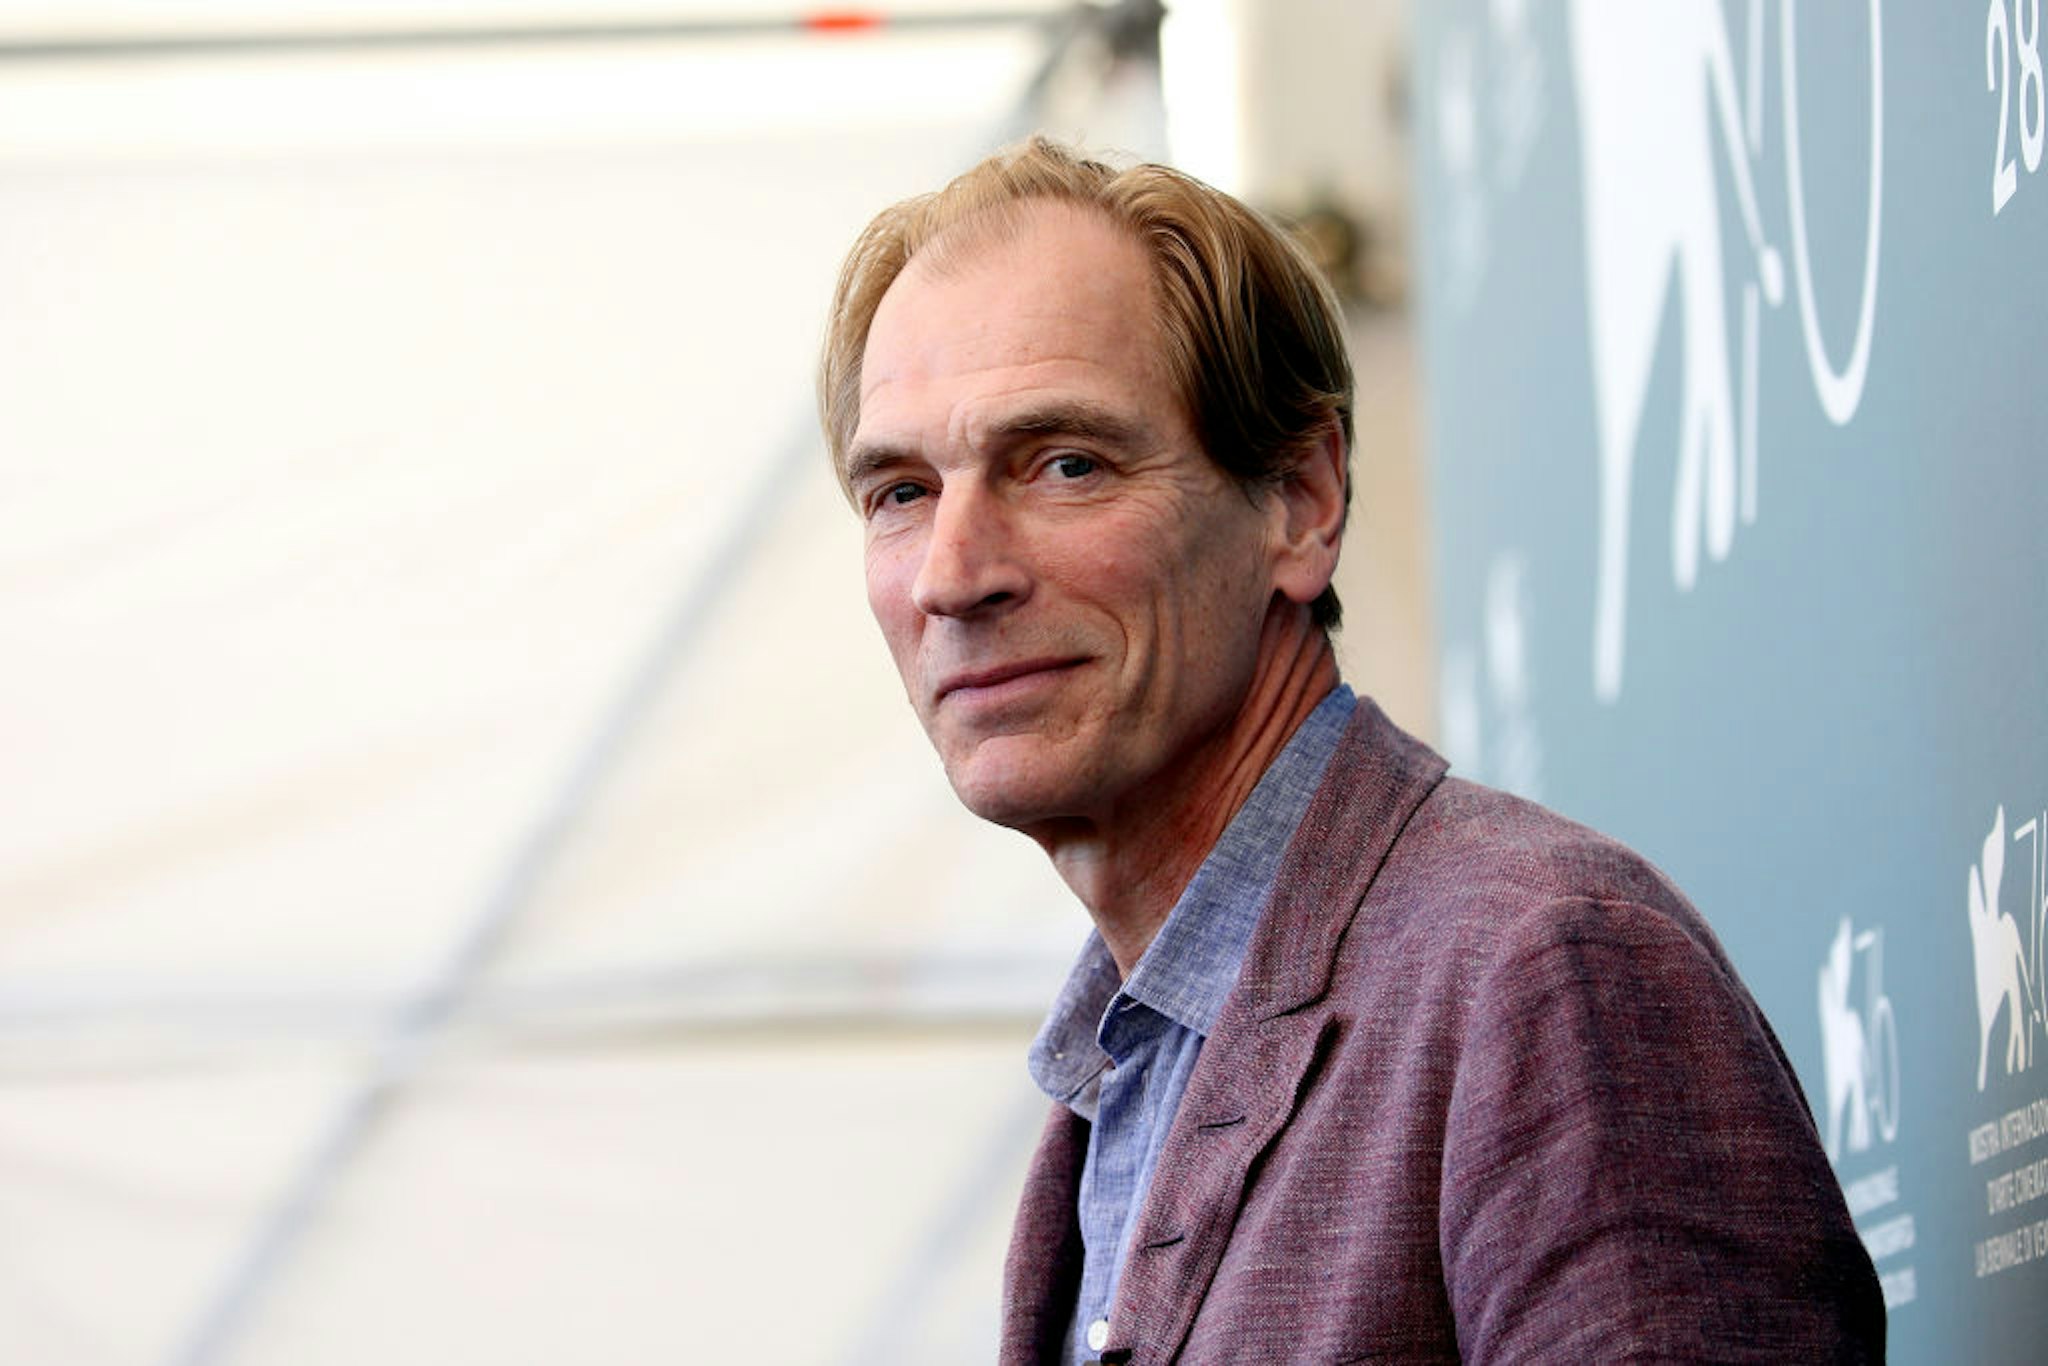 VENICE, ITALY - SEPTEMBER 03: Julian Sands attends "The Painted Bird" photocall during the 76th Venice Film Festival on September 03, 2019 in Venice, Italy. (Photo by Franco Origlia/Getty Images)